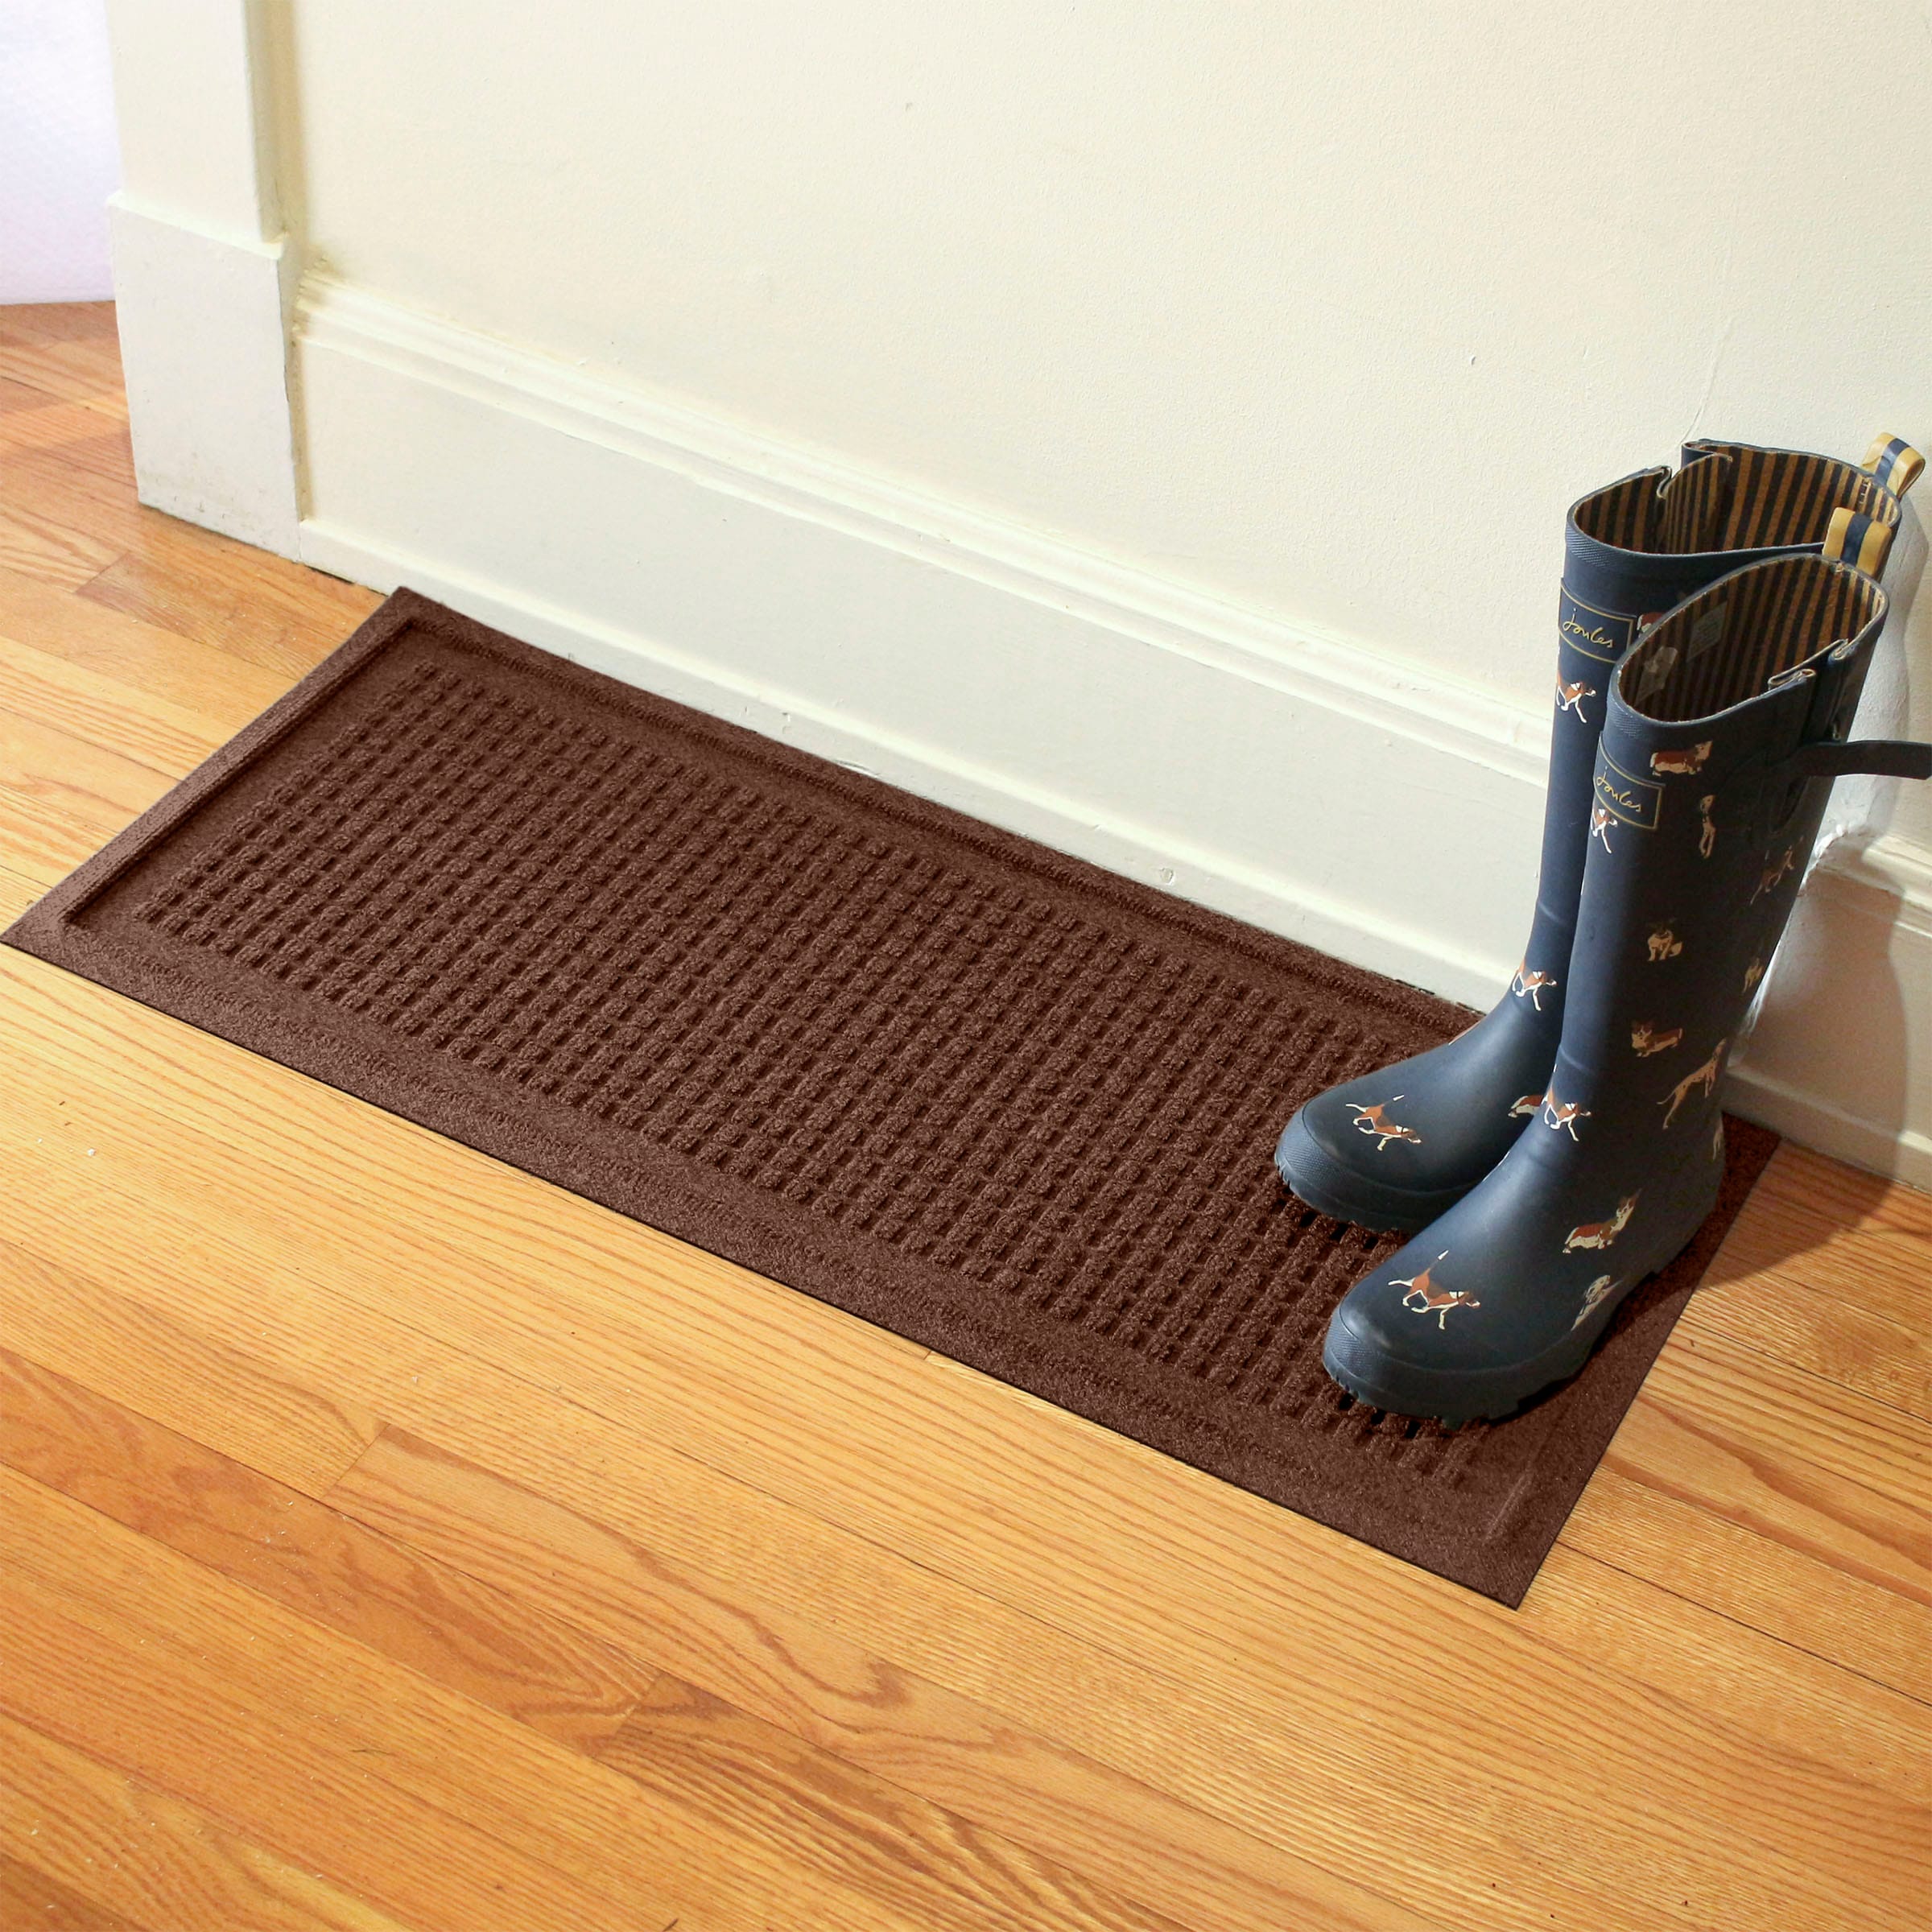 Mohawk Home Waffle Grid Impression Doormat, Brown, 3x4 ft